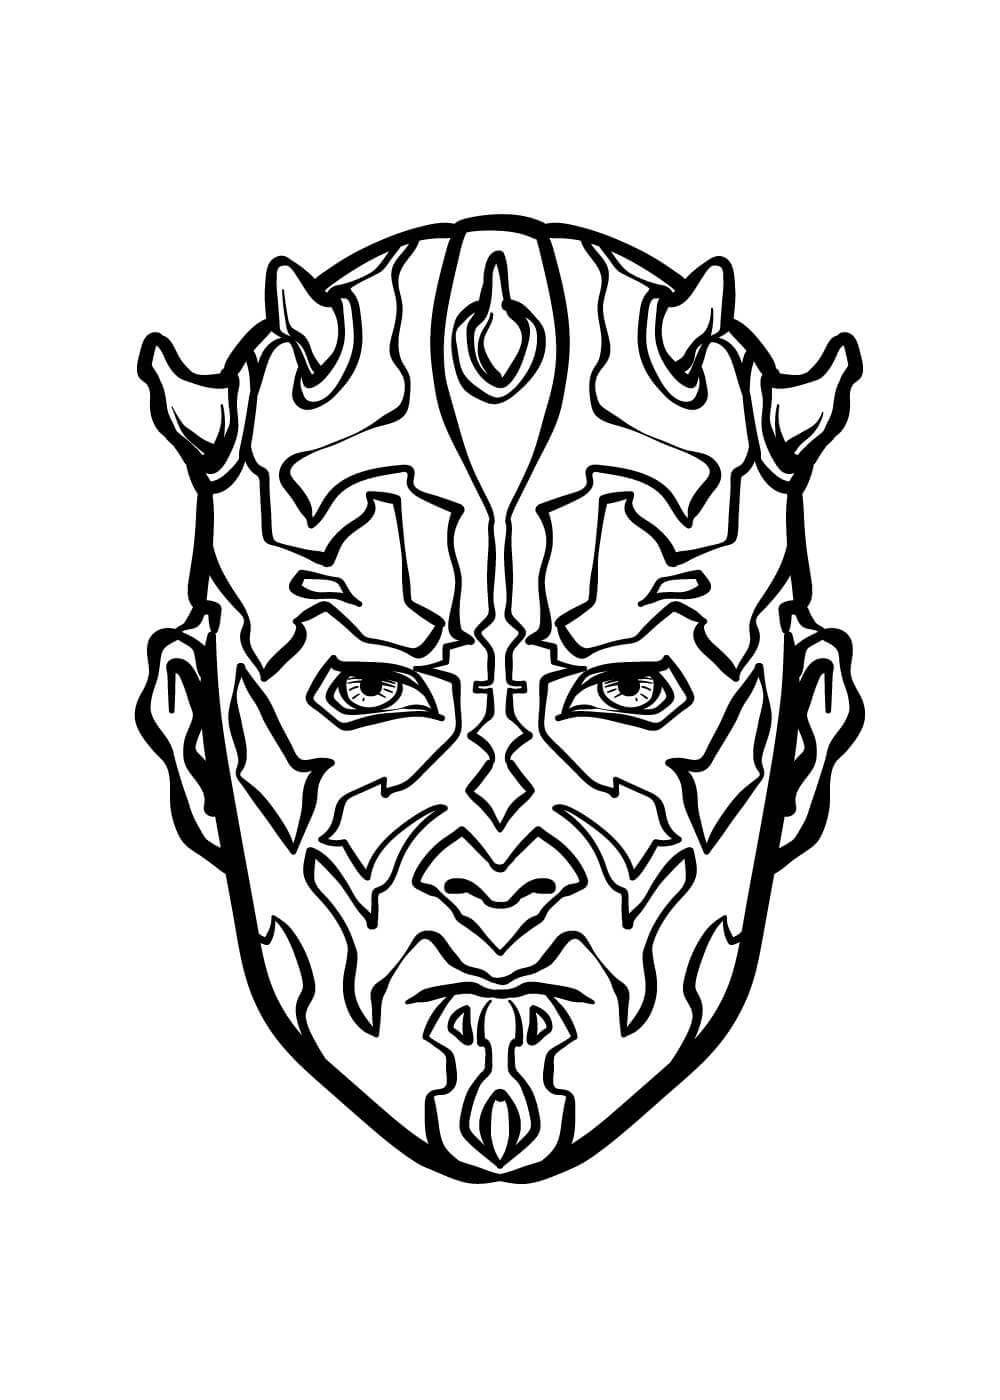 Dark Maul Star Wars coloring page